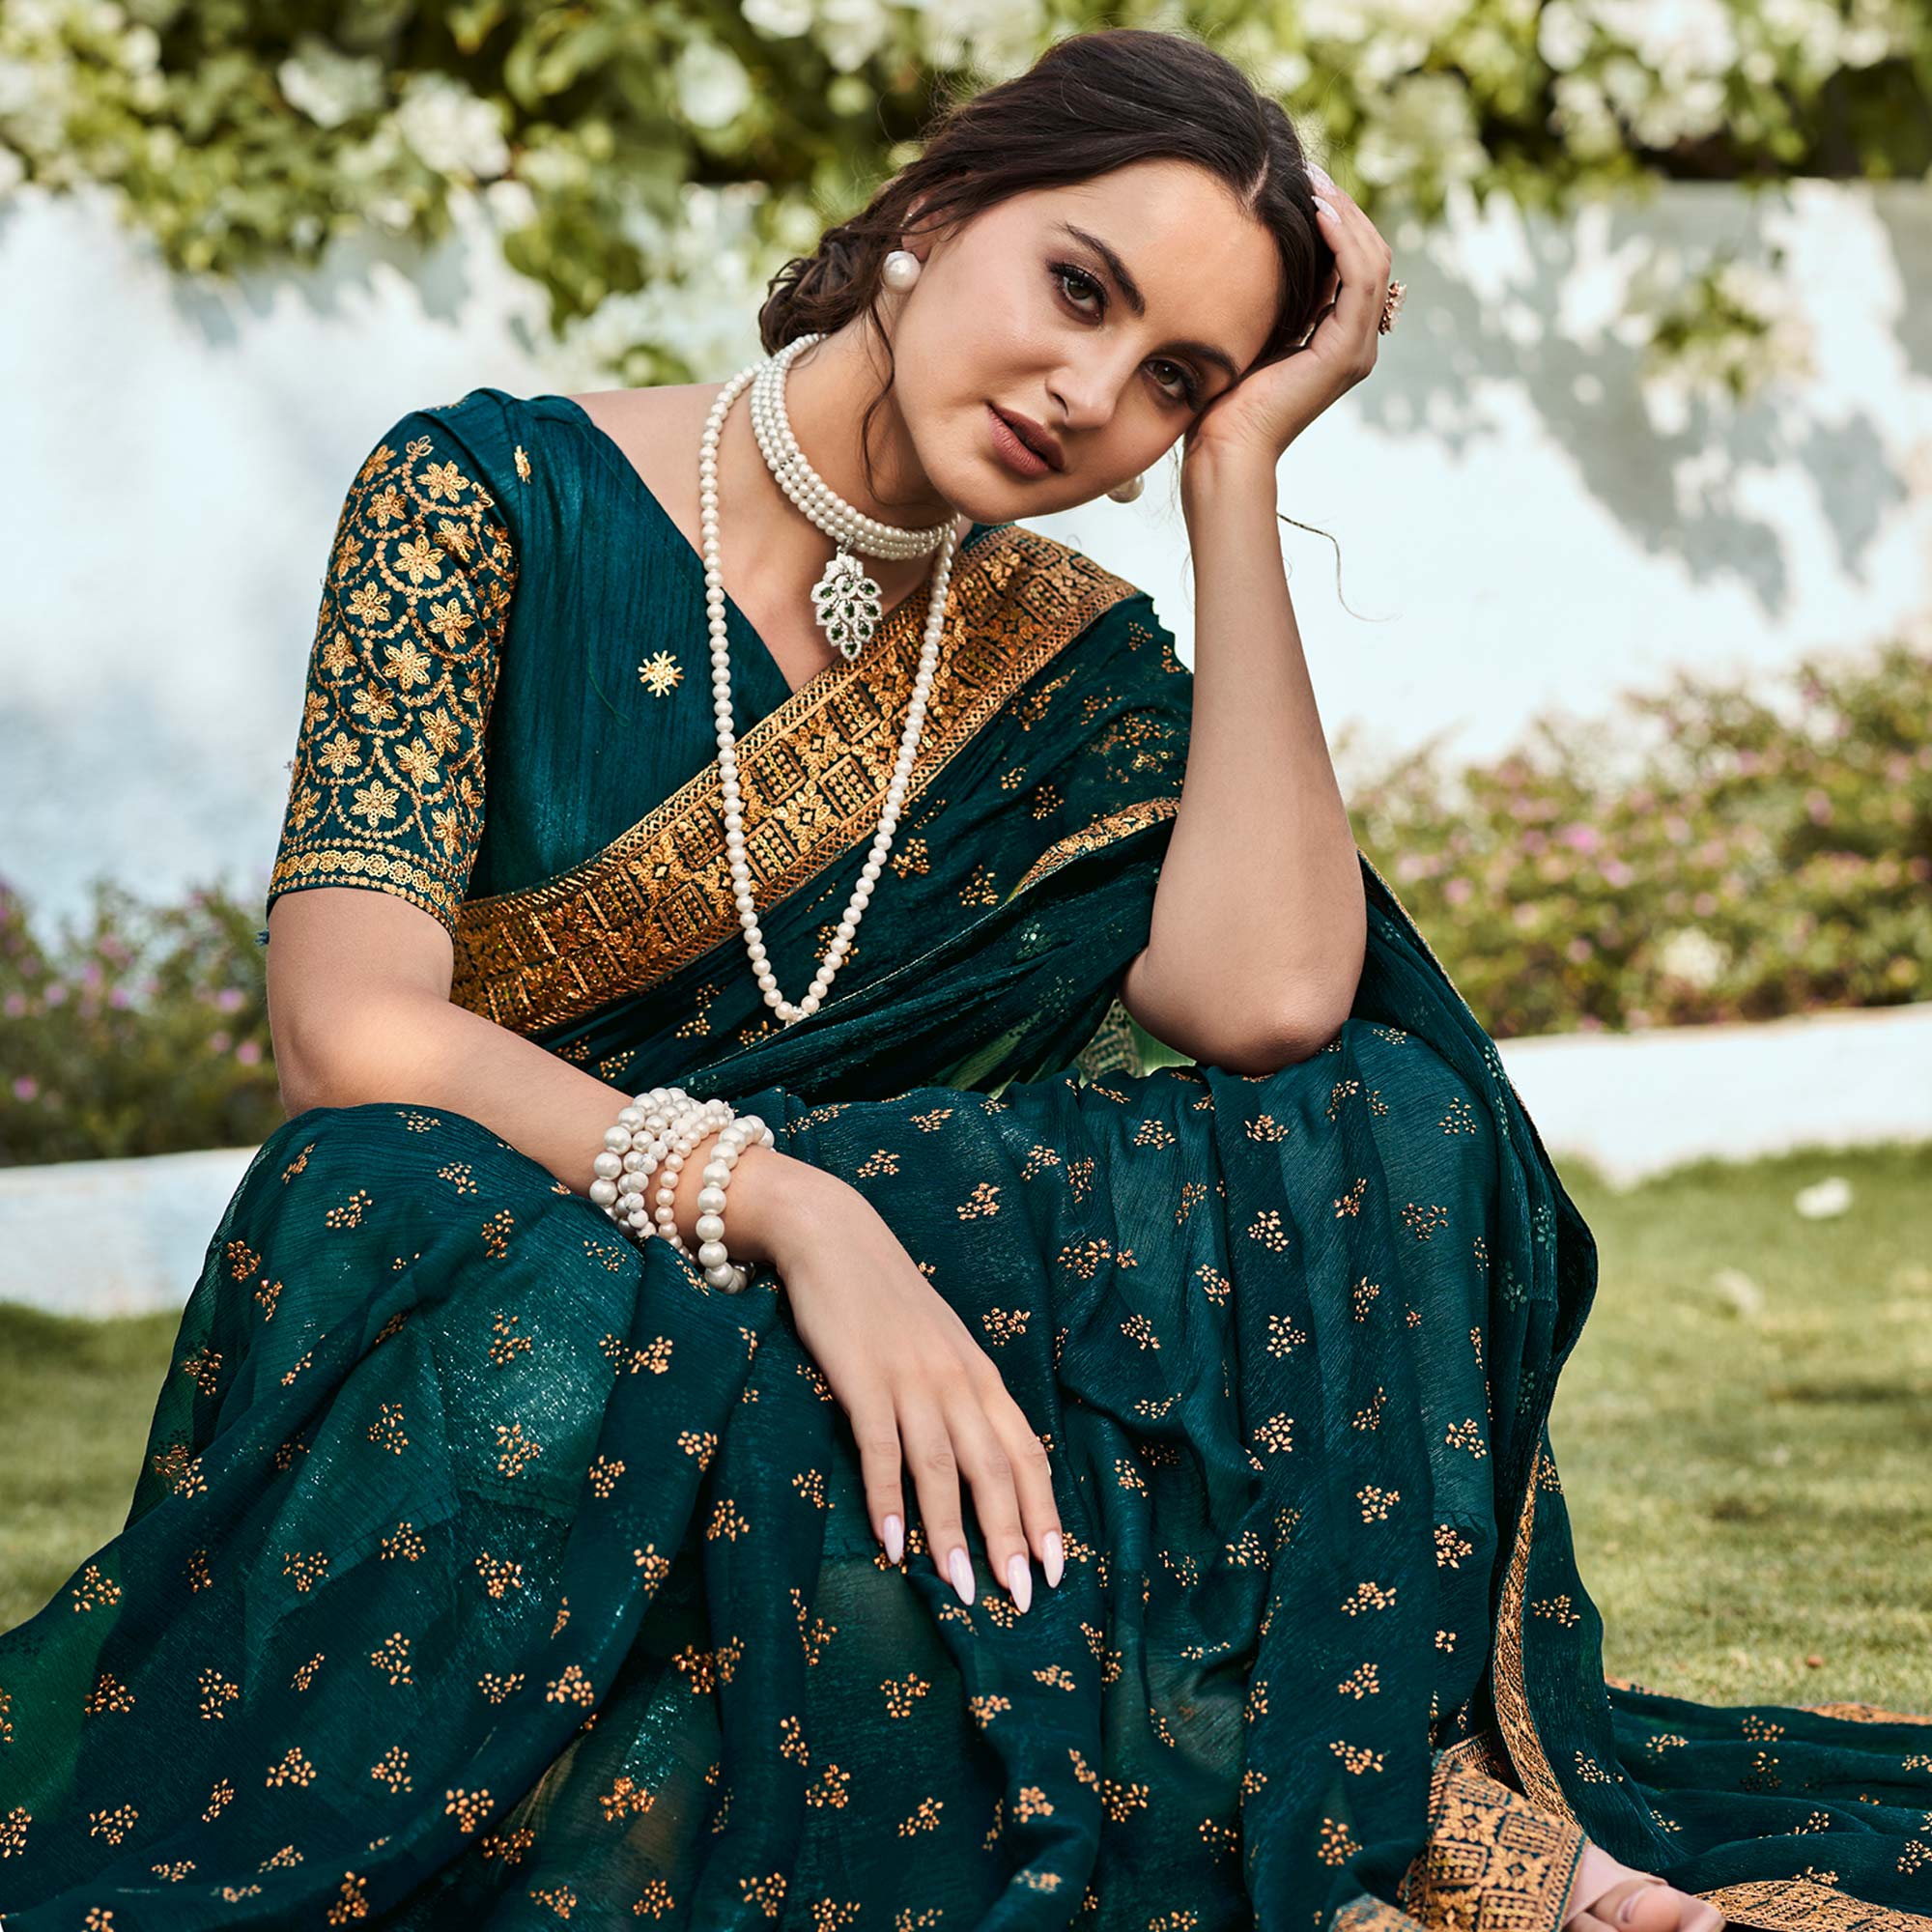 Dark Teal Green Foil Printed Georgette Saree With Embroidered Border